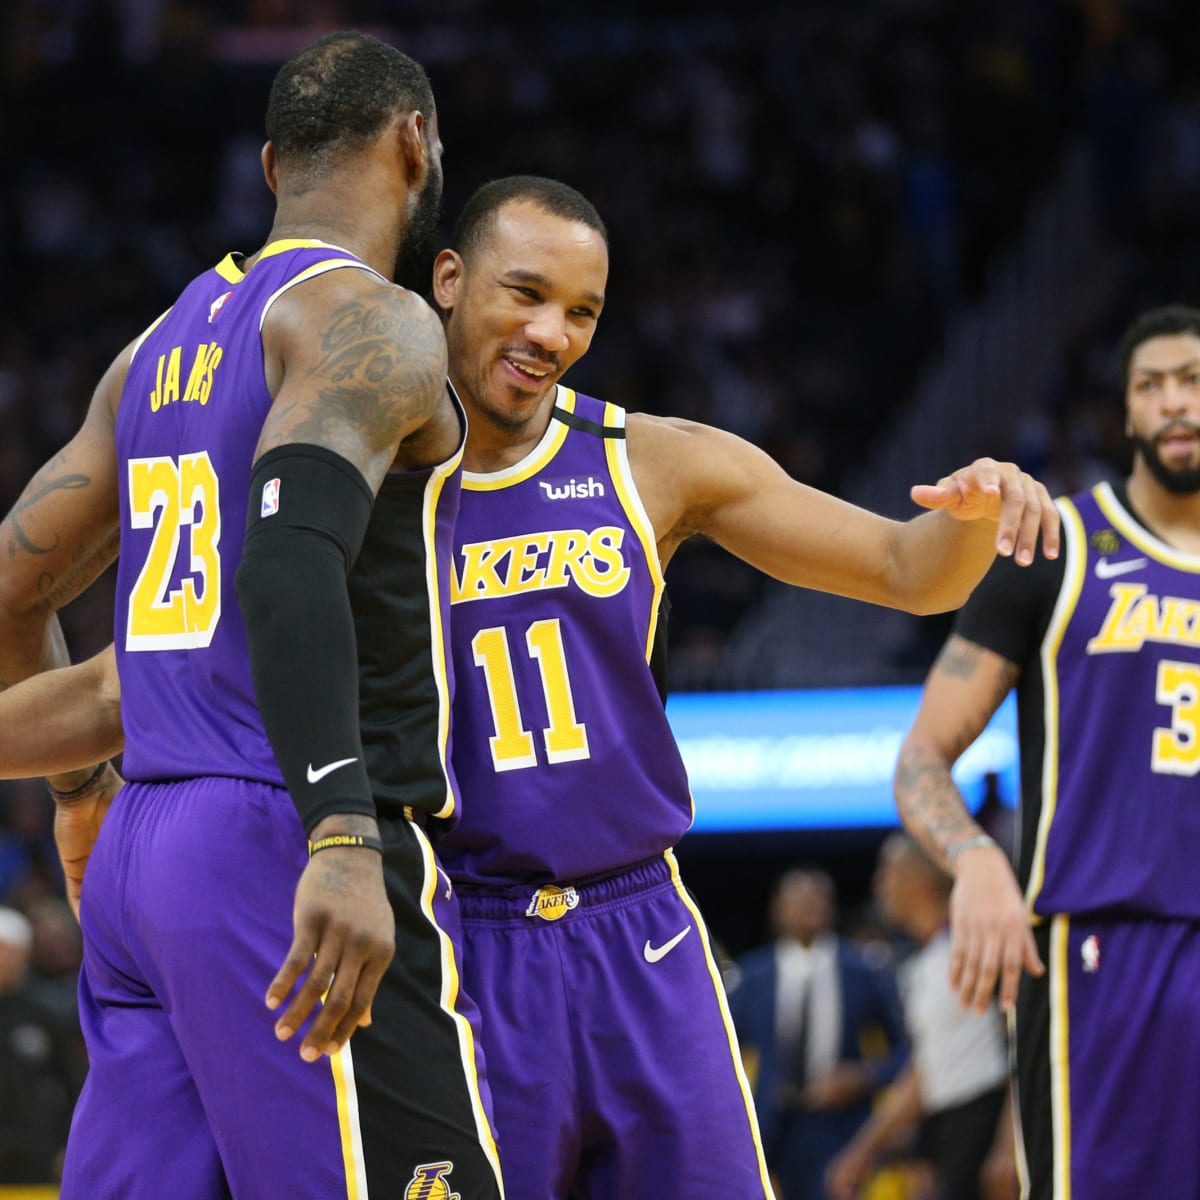 Los Angeles Lakers City Edition Uniform: from innovation to tradition